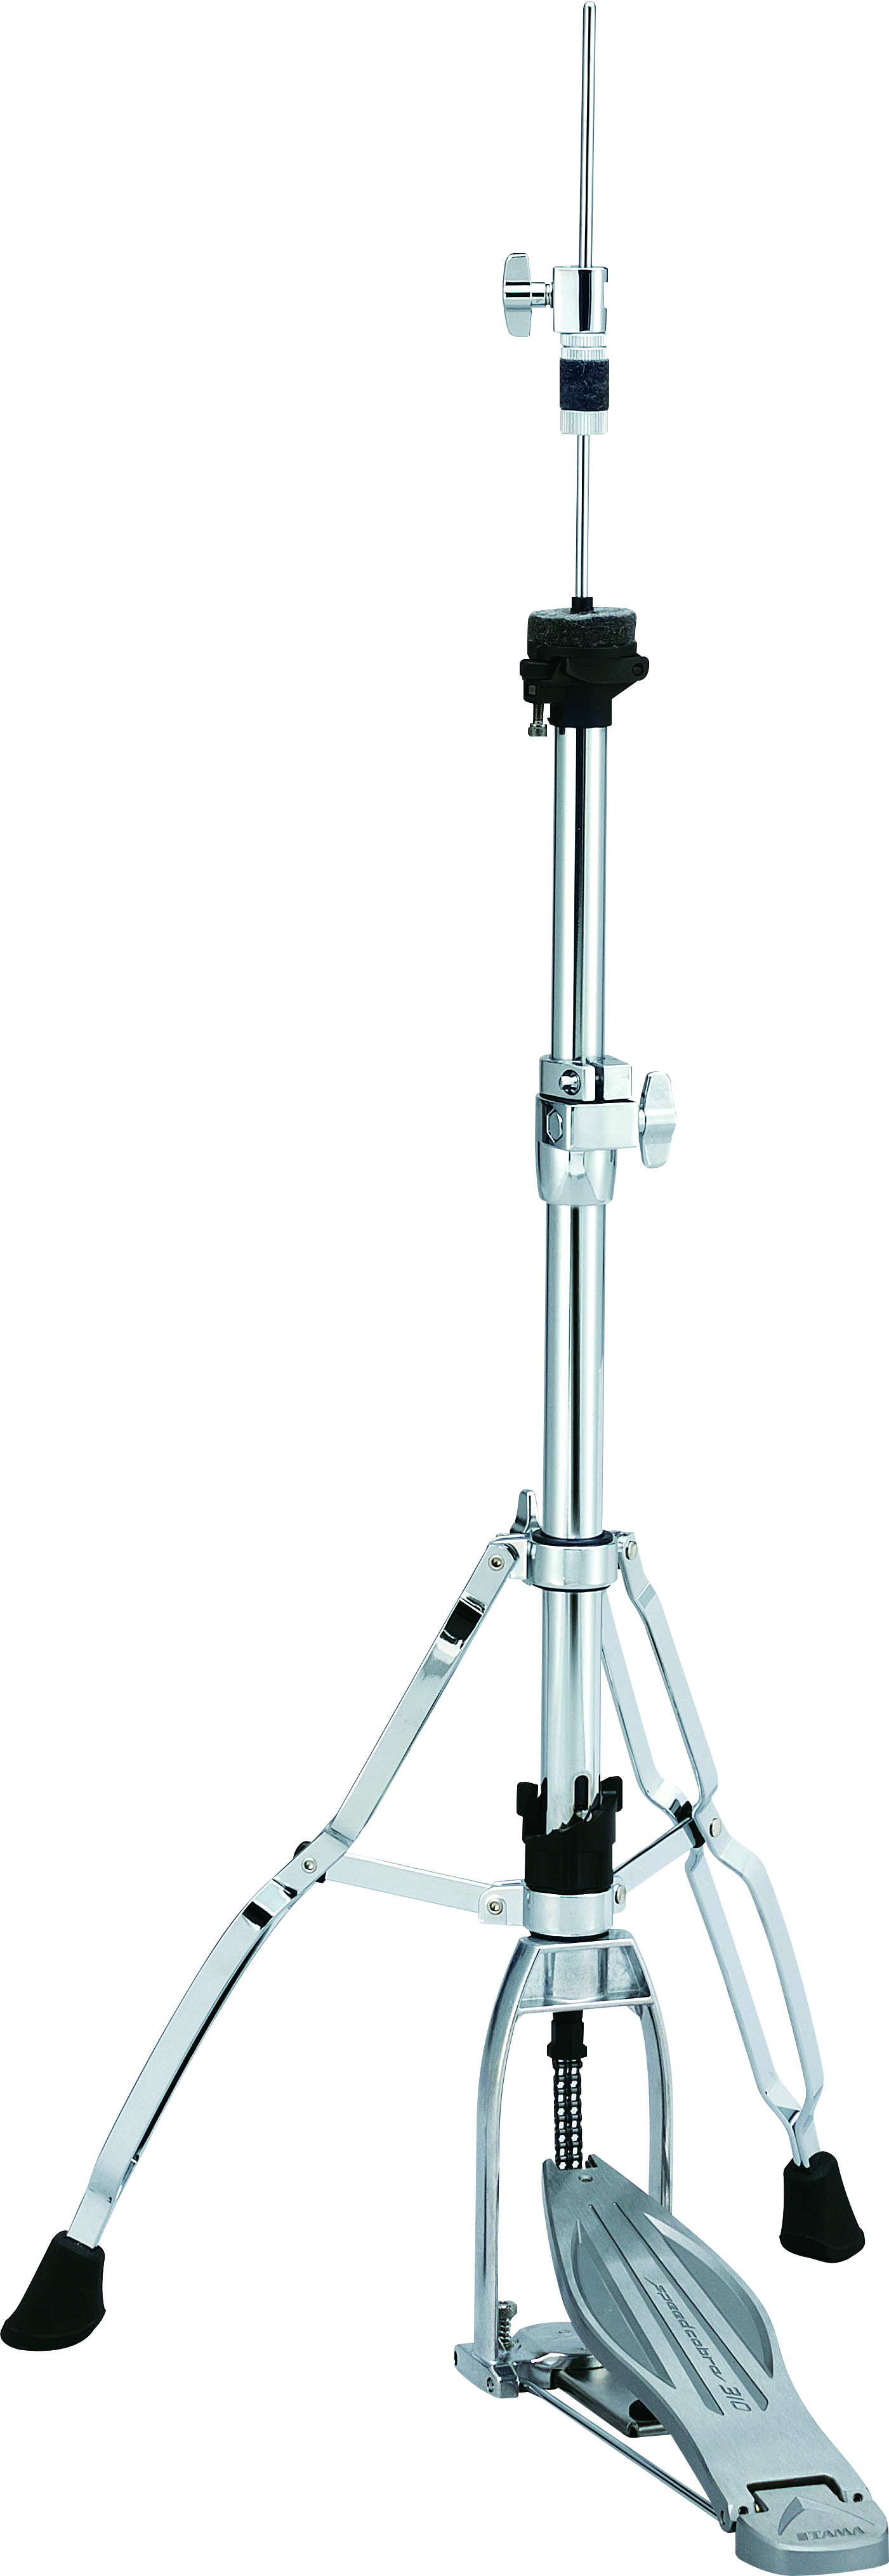 Tama Hh315d Tam Hihat Stand - HiHatpedaal - Main picture